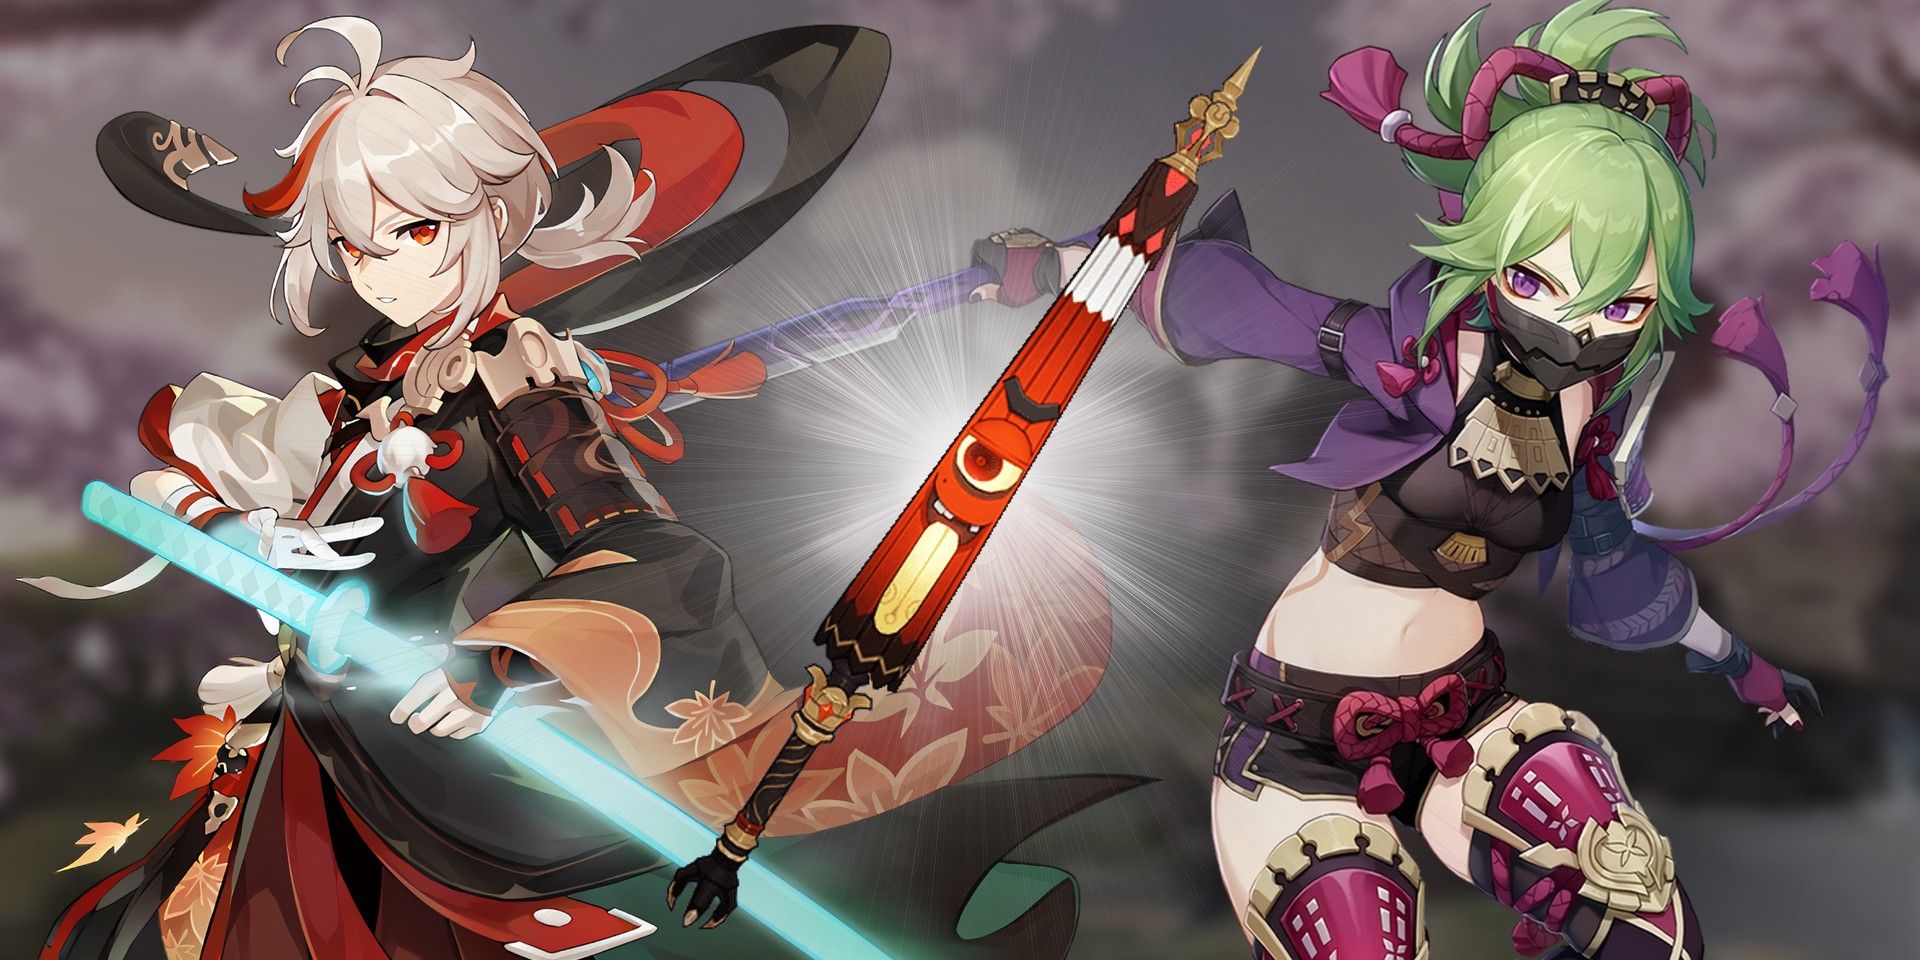 Genshin Impact's Kazuha to the left and Kuki Shinobu to the right; in between them is the new sword Toukabou Shigure, while an Inazuman landscape is blurred out in the background.